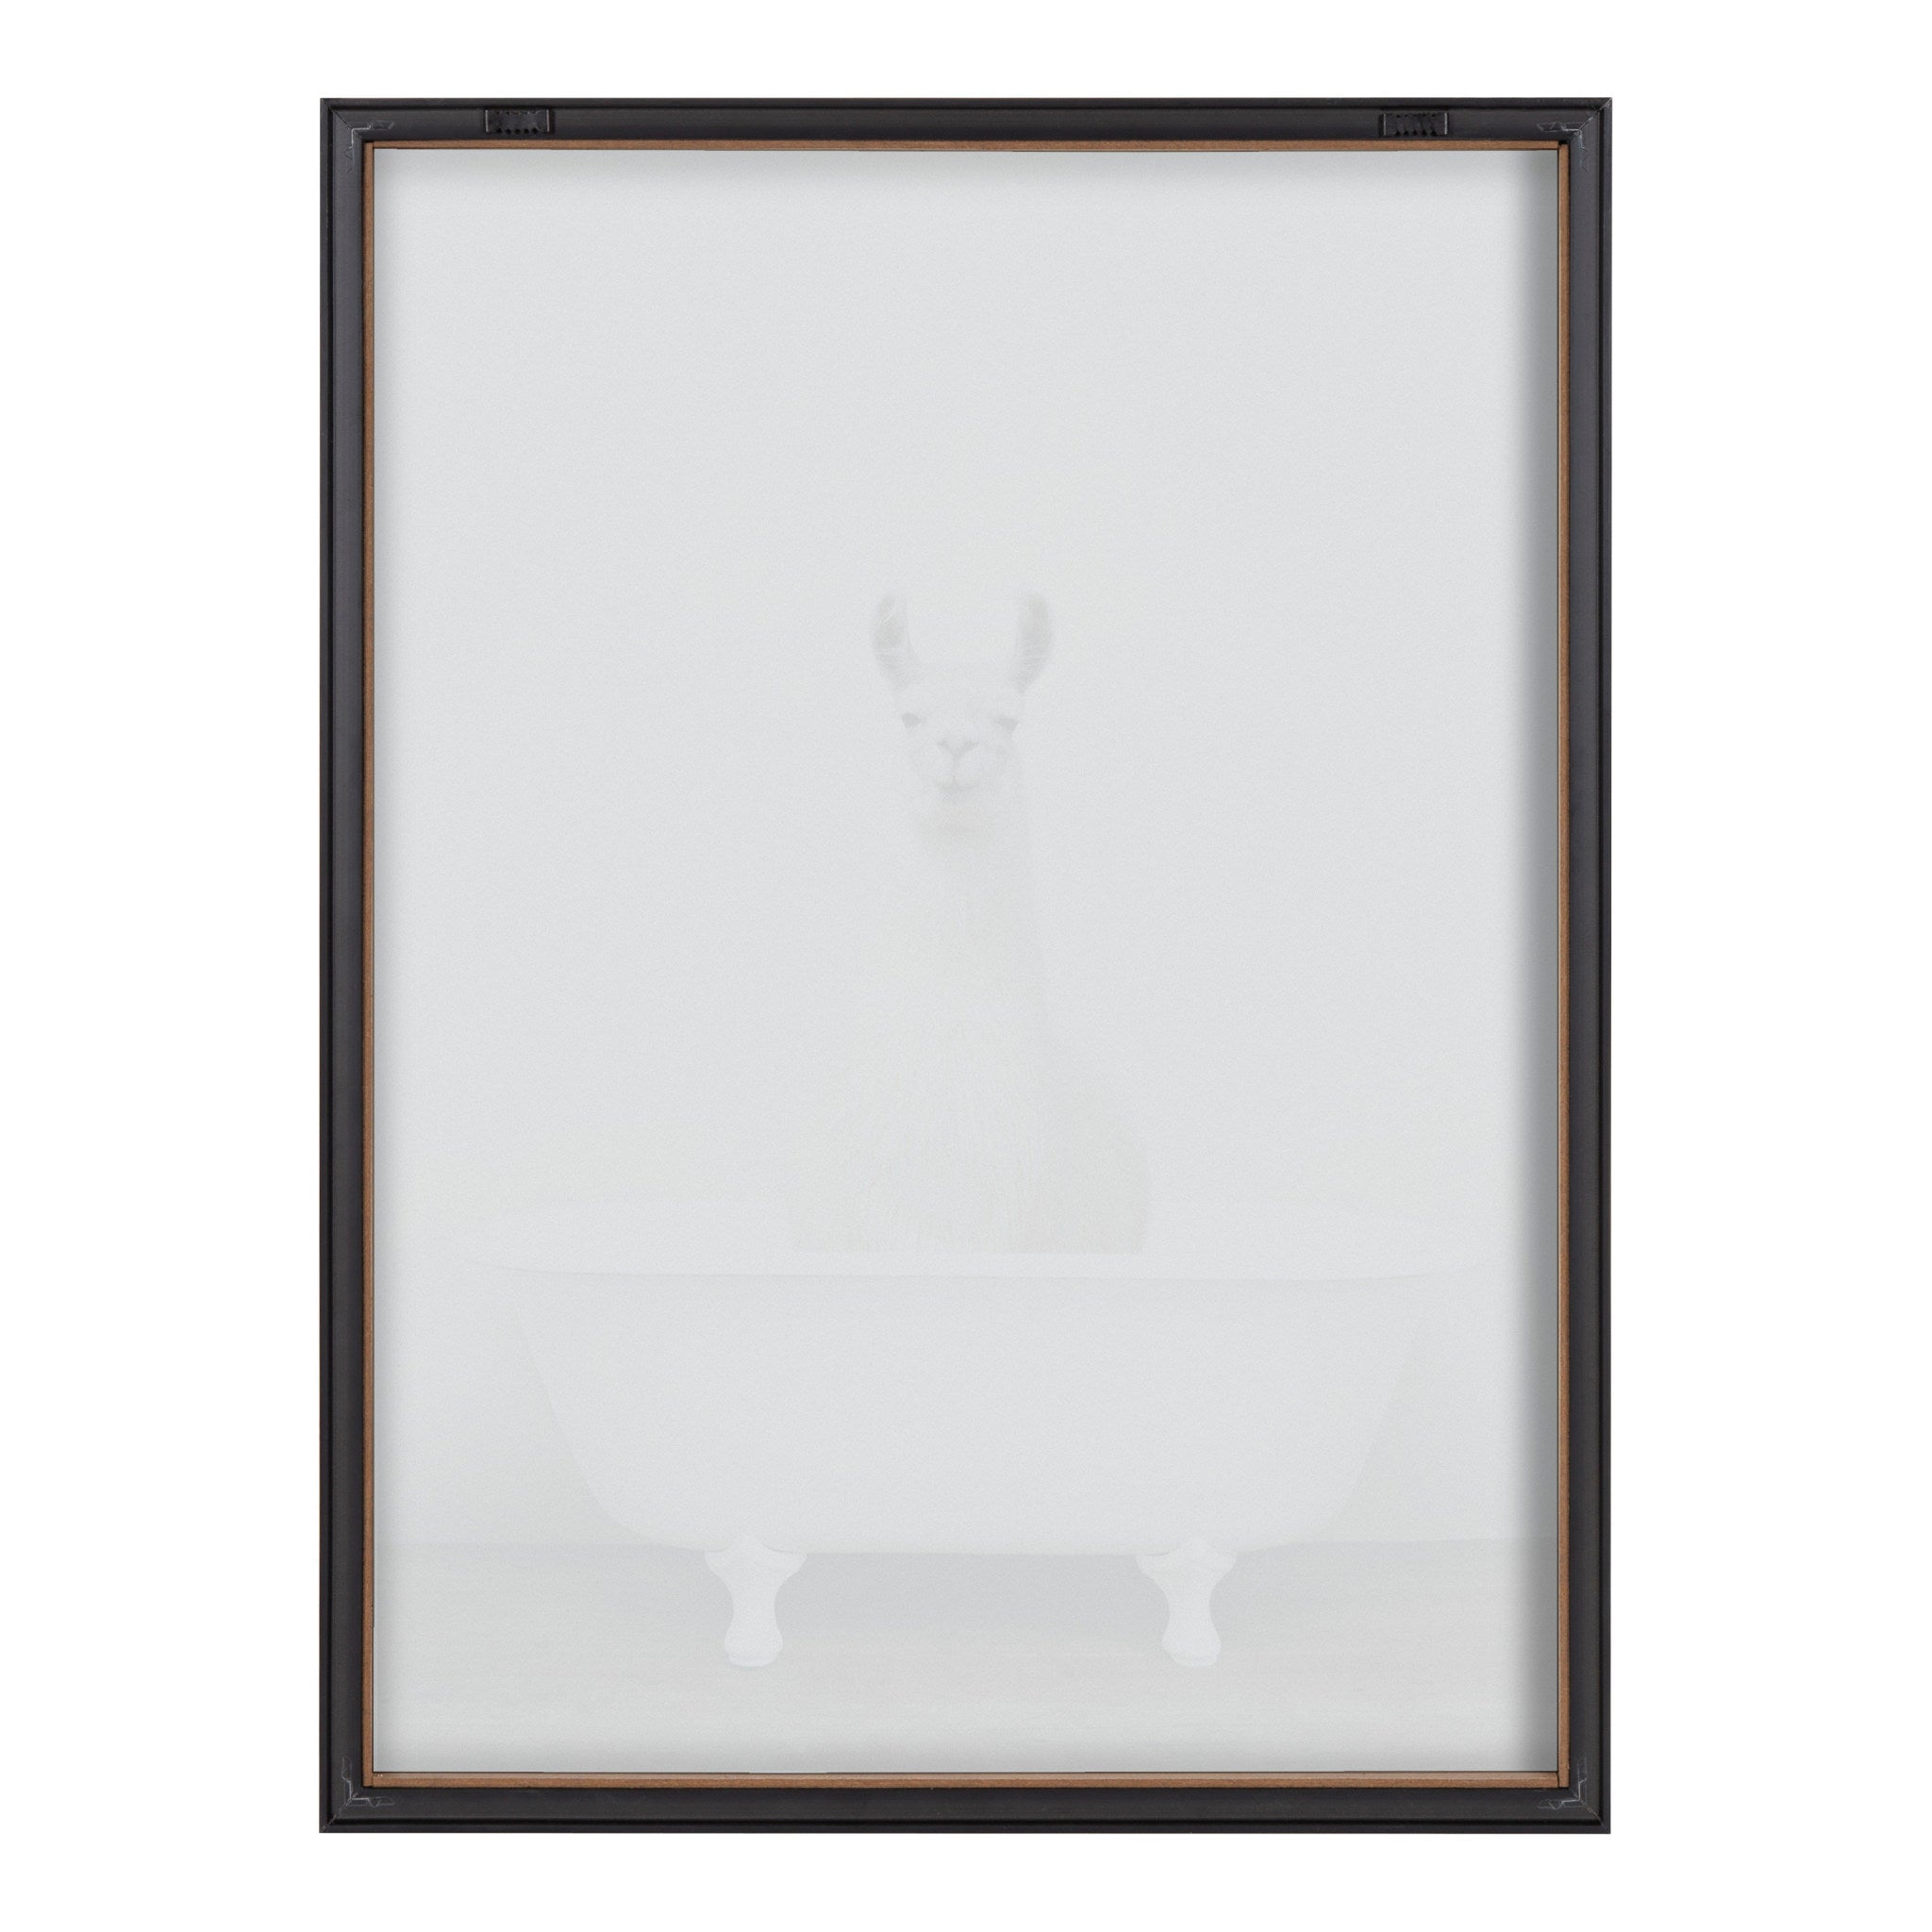 Blake Alpaca in the Tub Color Framed Printed Glass by Amy Peterson Art Studio